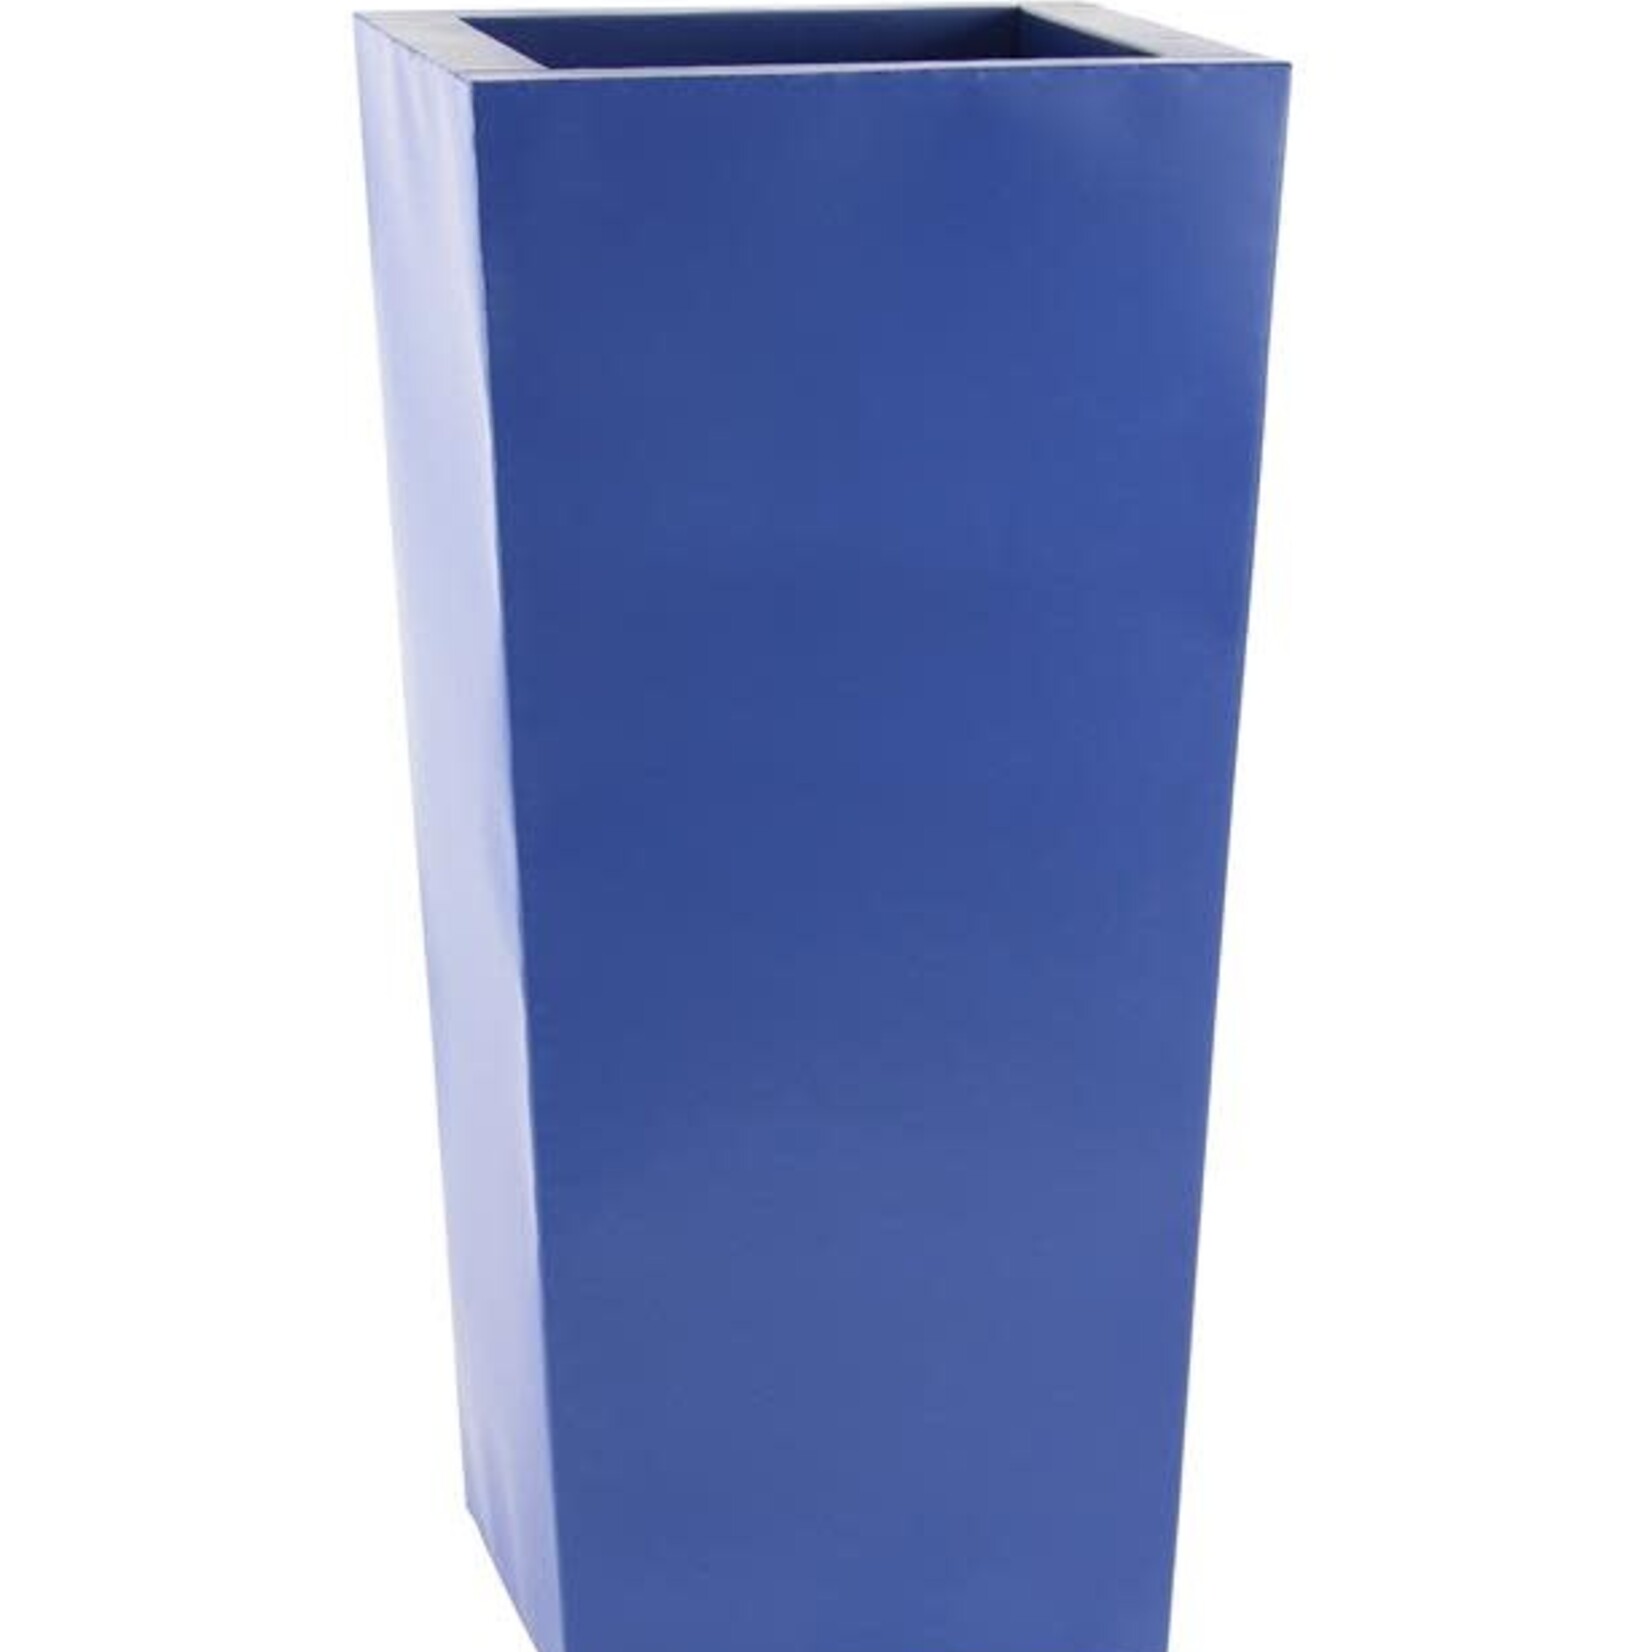 60% off was $200 now $80.00, 35”H X 17” BLUE TAPER METAL PLANTERS